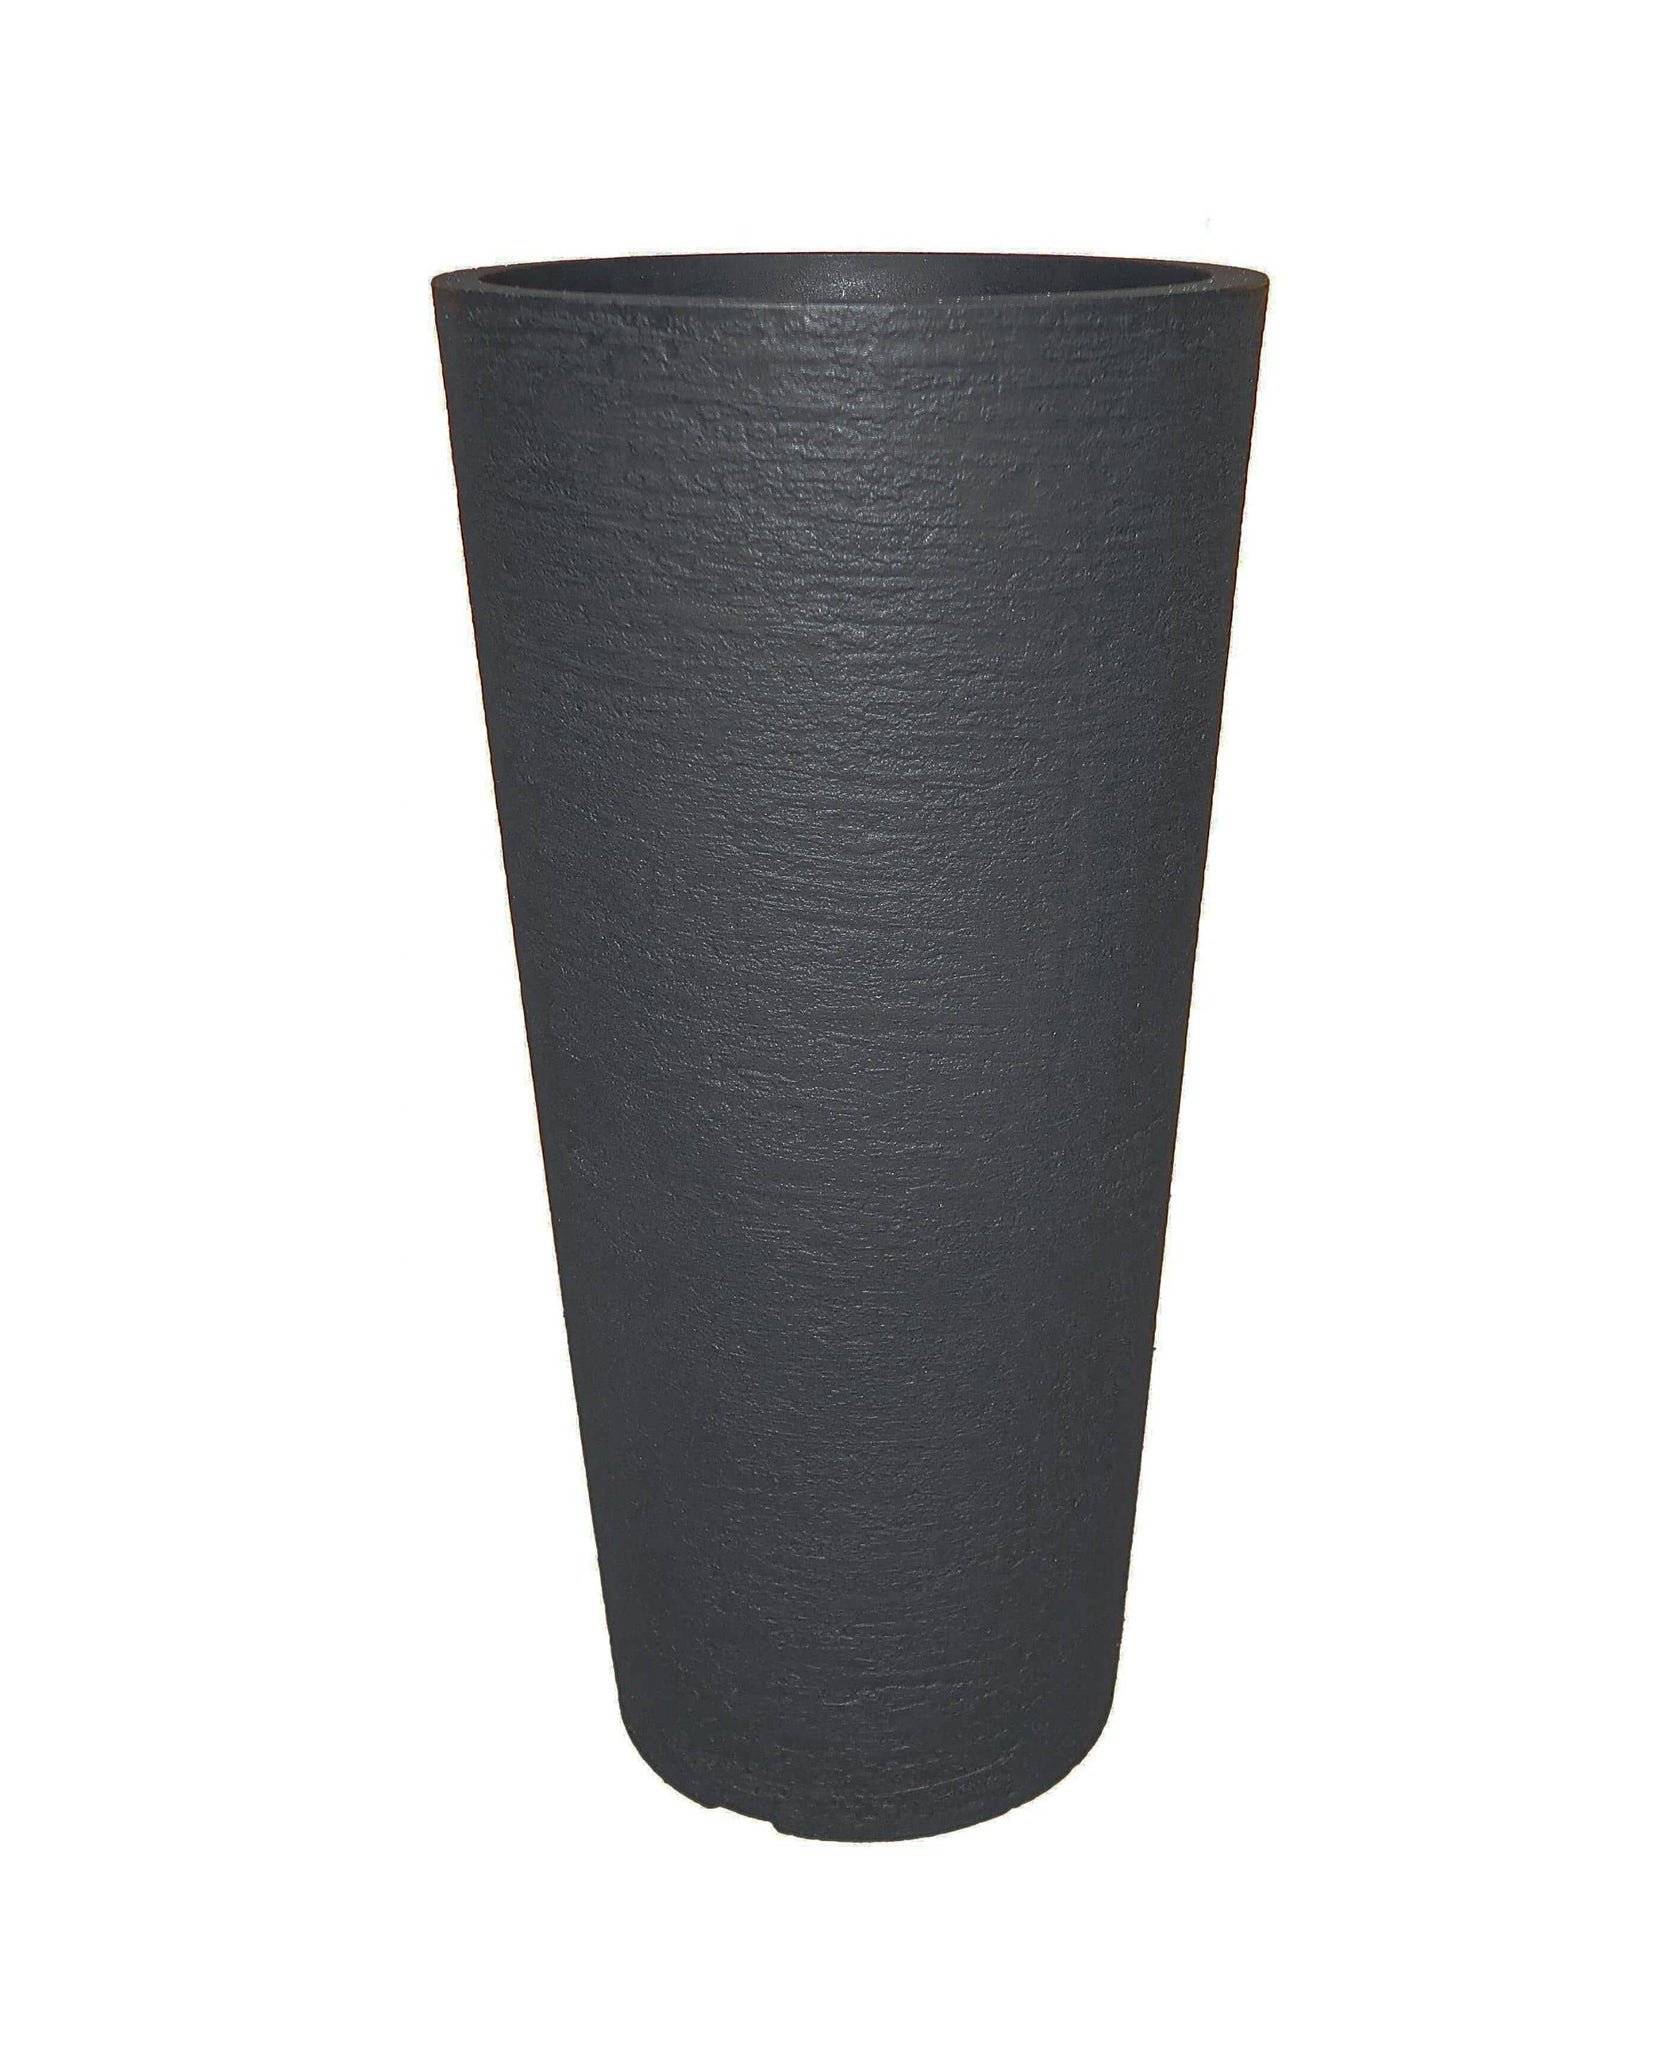 Meduim Tall plant pot, slim with a textured finish. The European Conic Japi planter shown in the colour lead is suitable with any style of decor. Fits in to narrow spaces. Florastyle by Hingham.